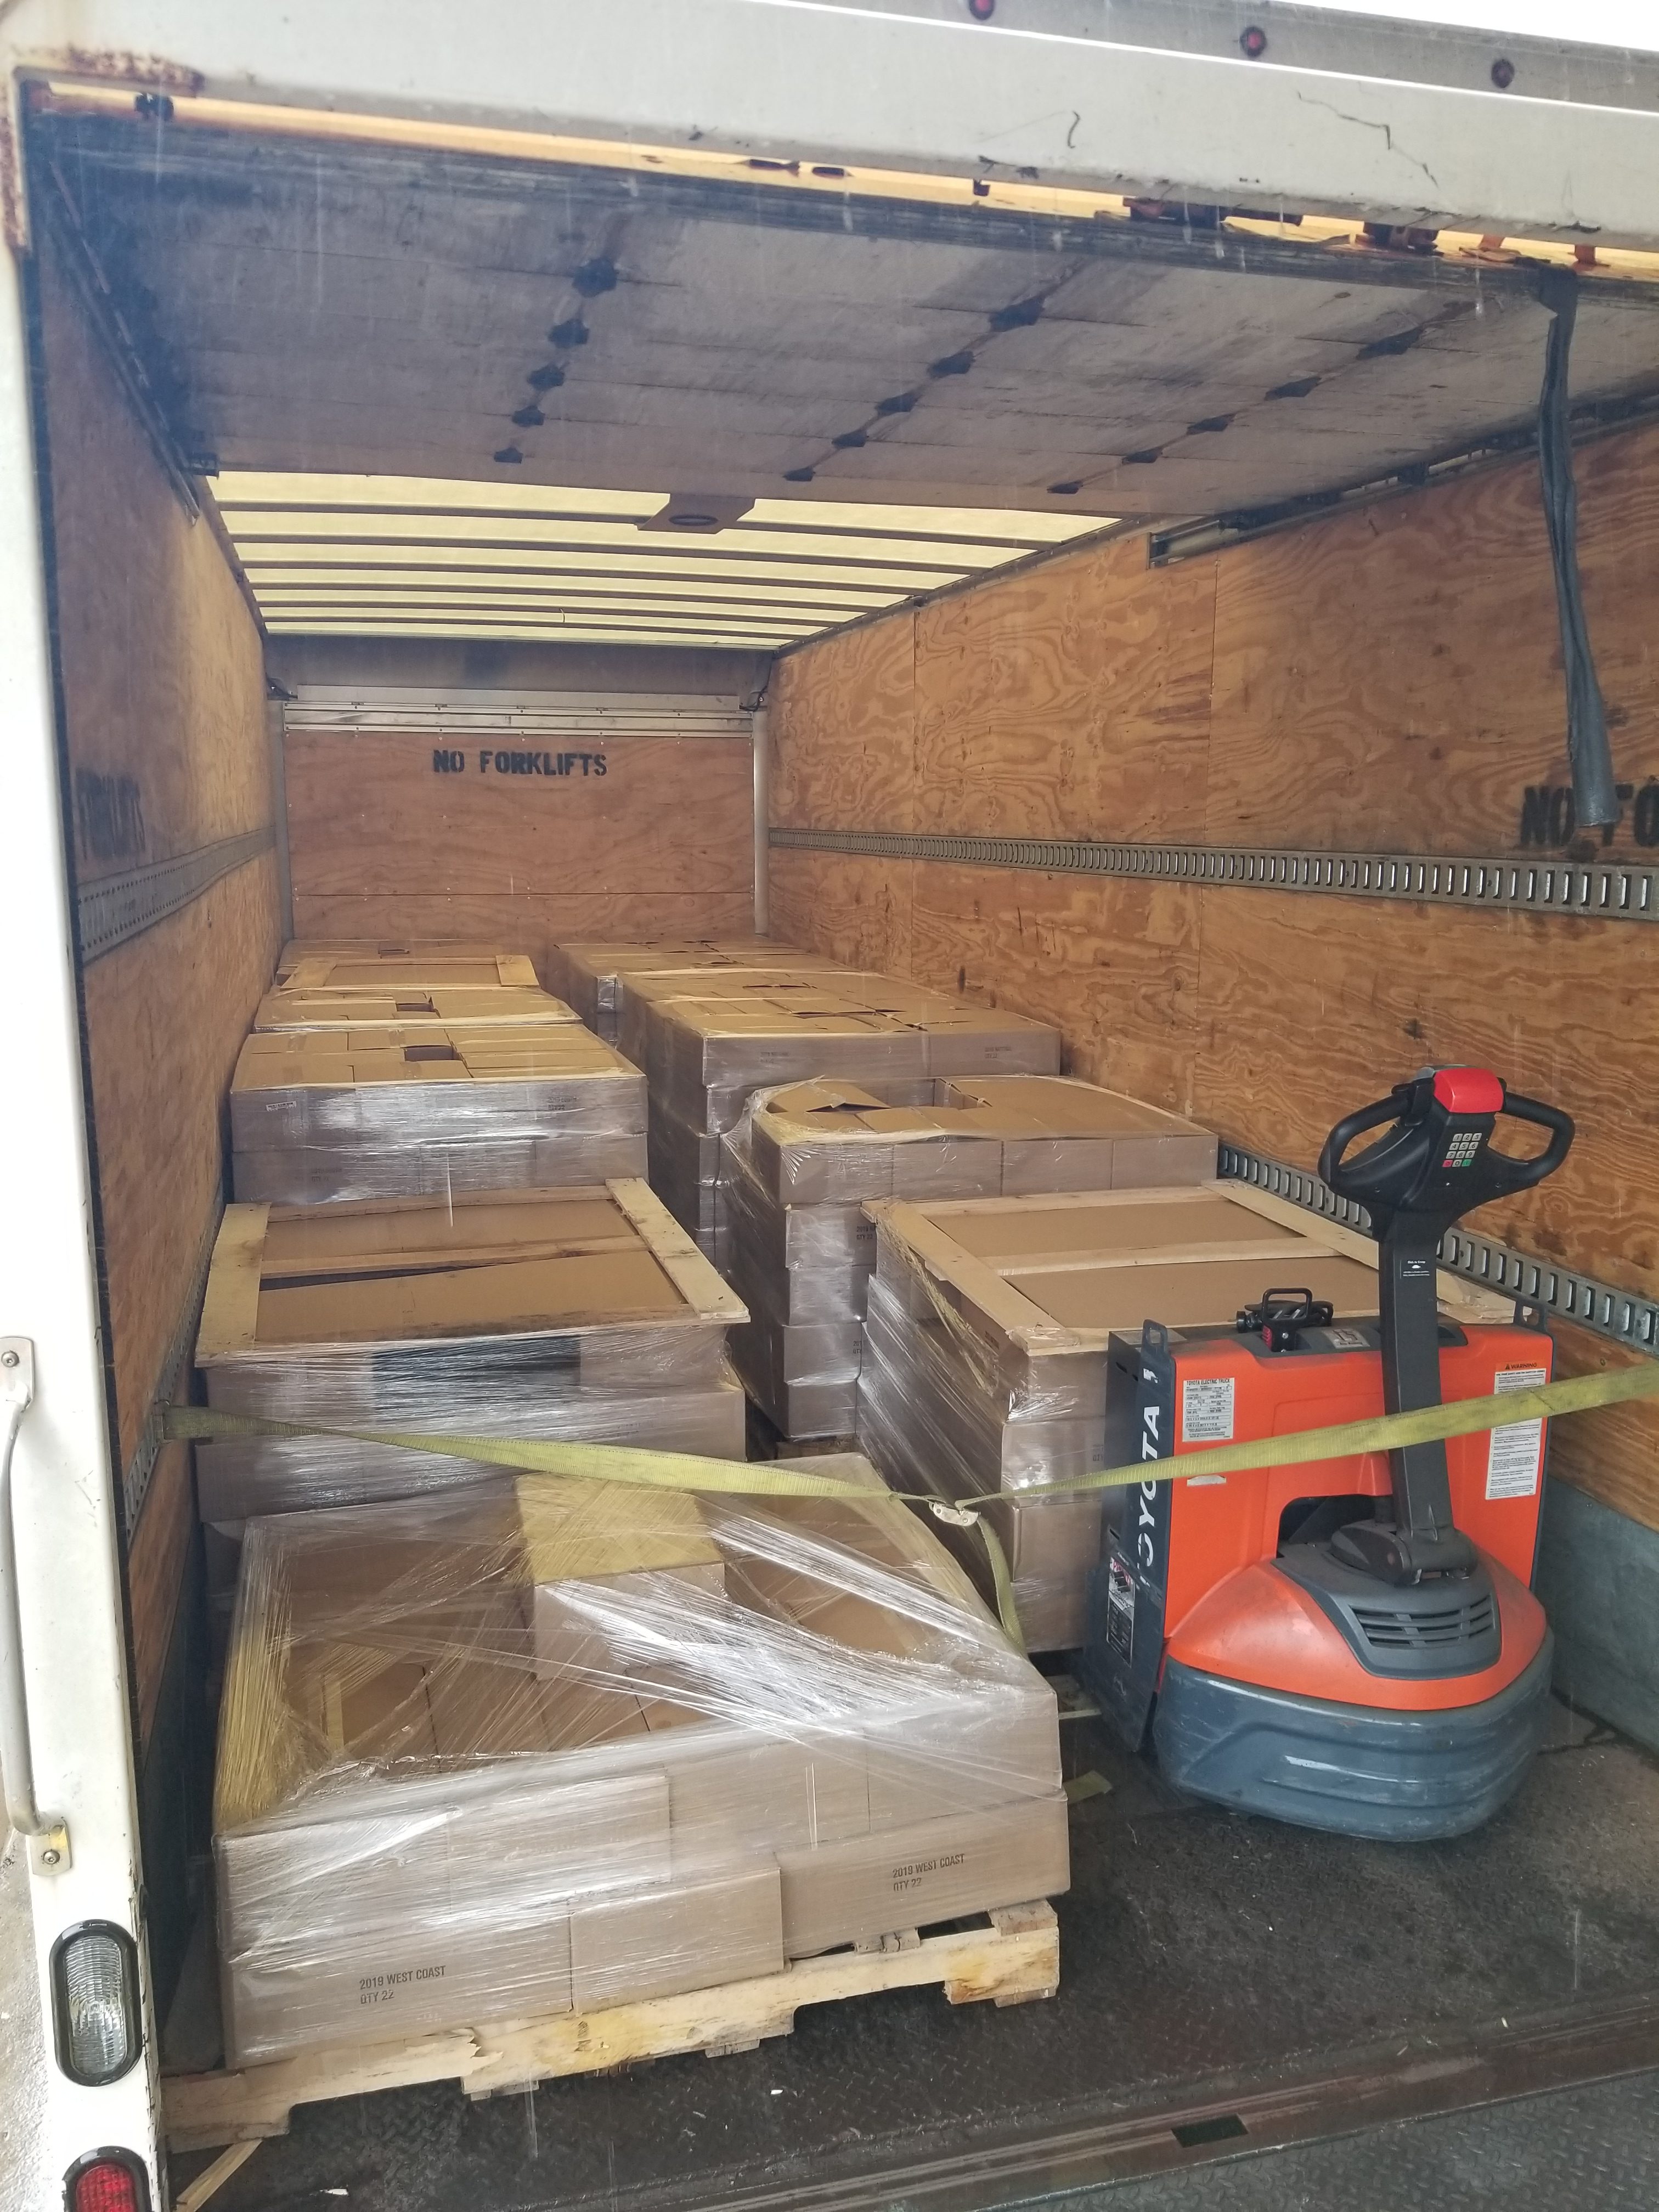 The Truck is here, the 2019 Magazines are shipping now.